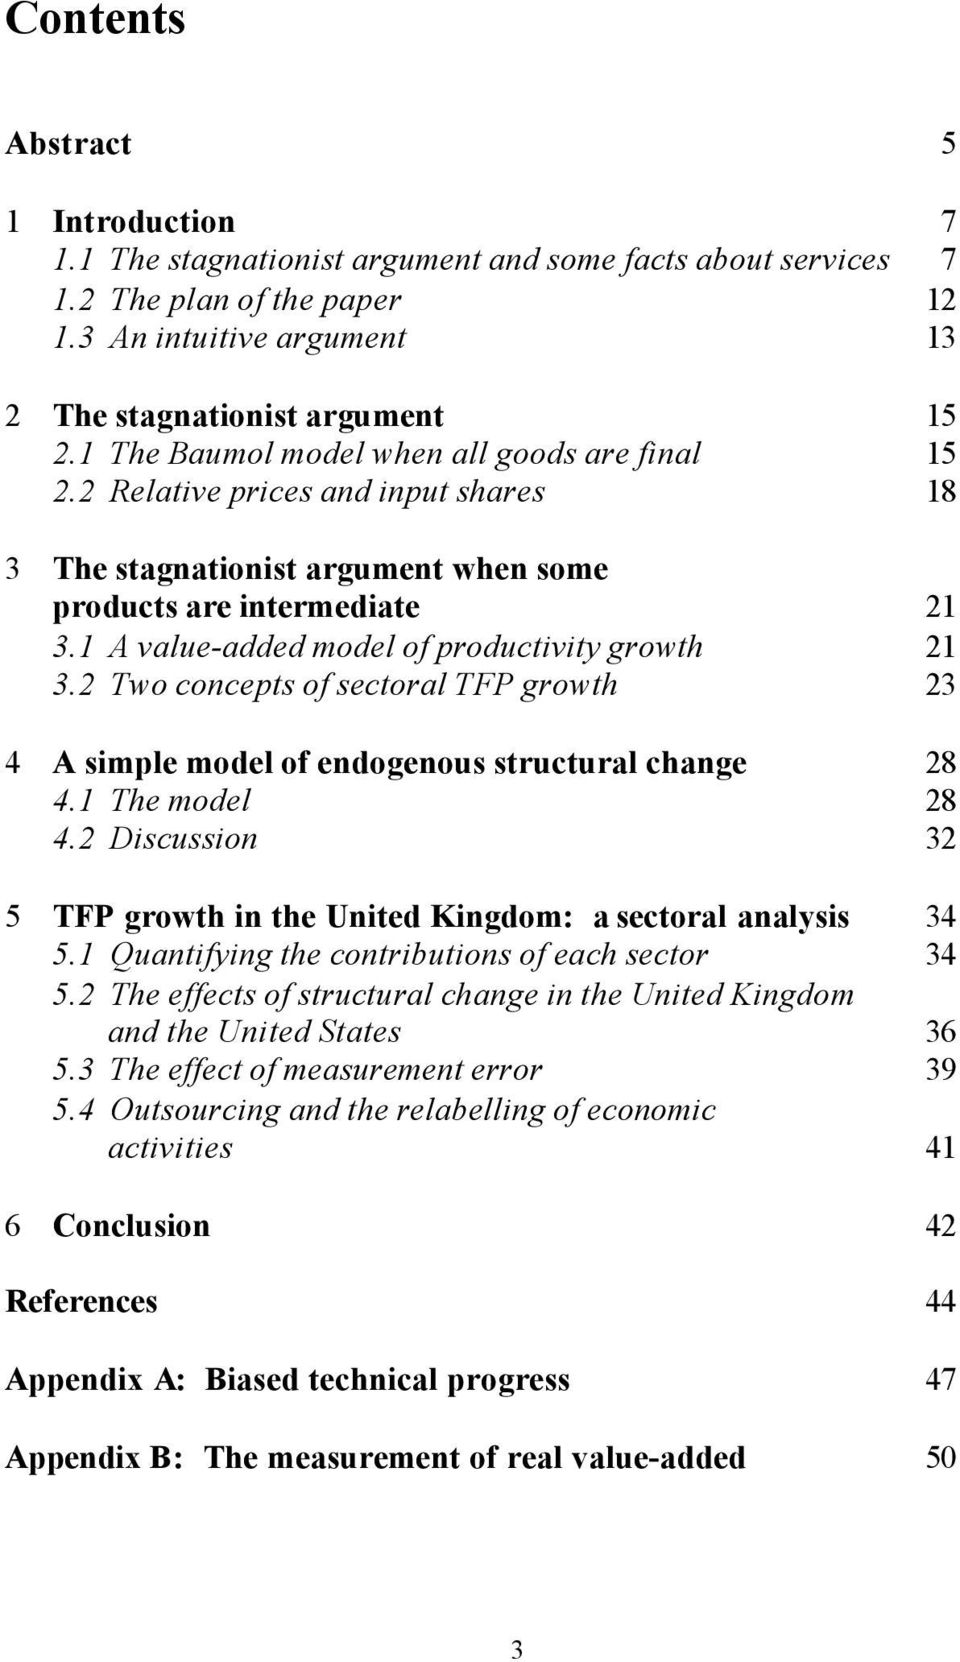 Two cocepts of sectoral TFP growth 3 4 A smple model of edogeous structural chage 8 4. The model 8 4. Dscusso 3 5 TFP growth the Uted Kgdom: a sectoral aalyss 34 5.